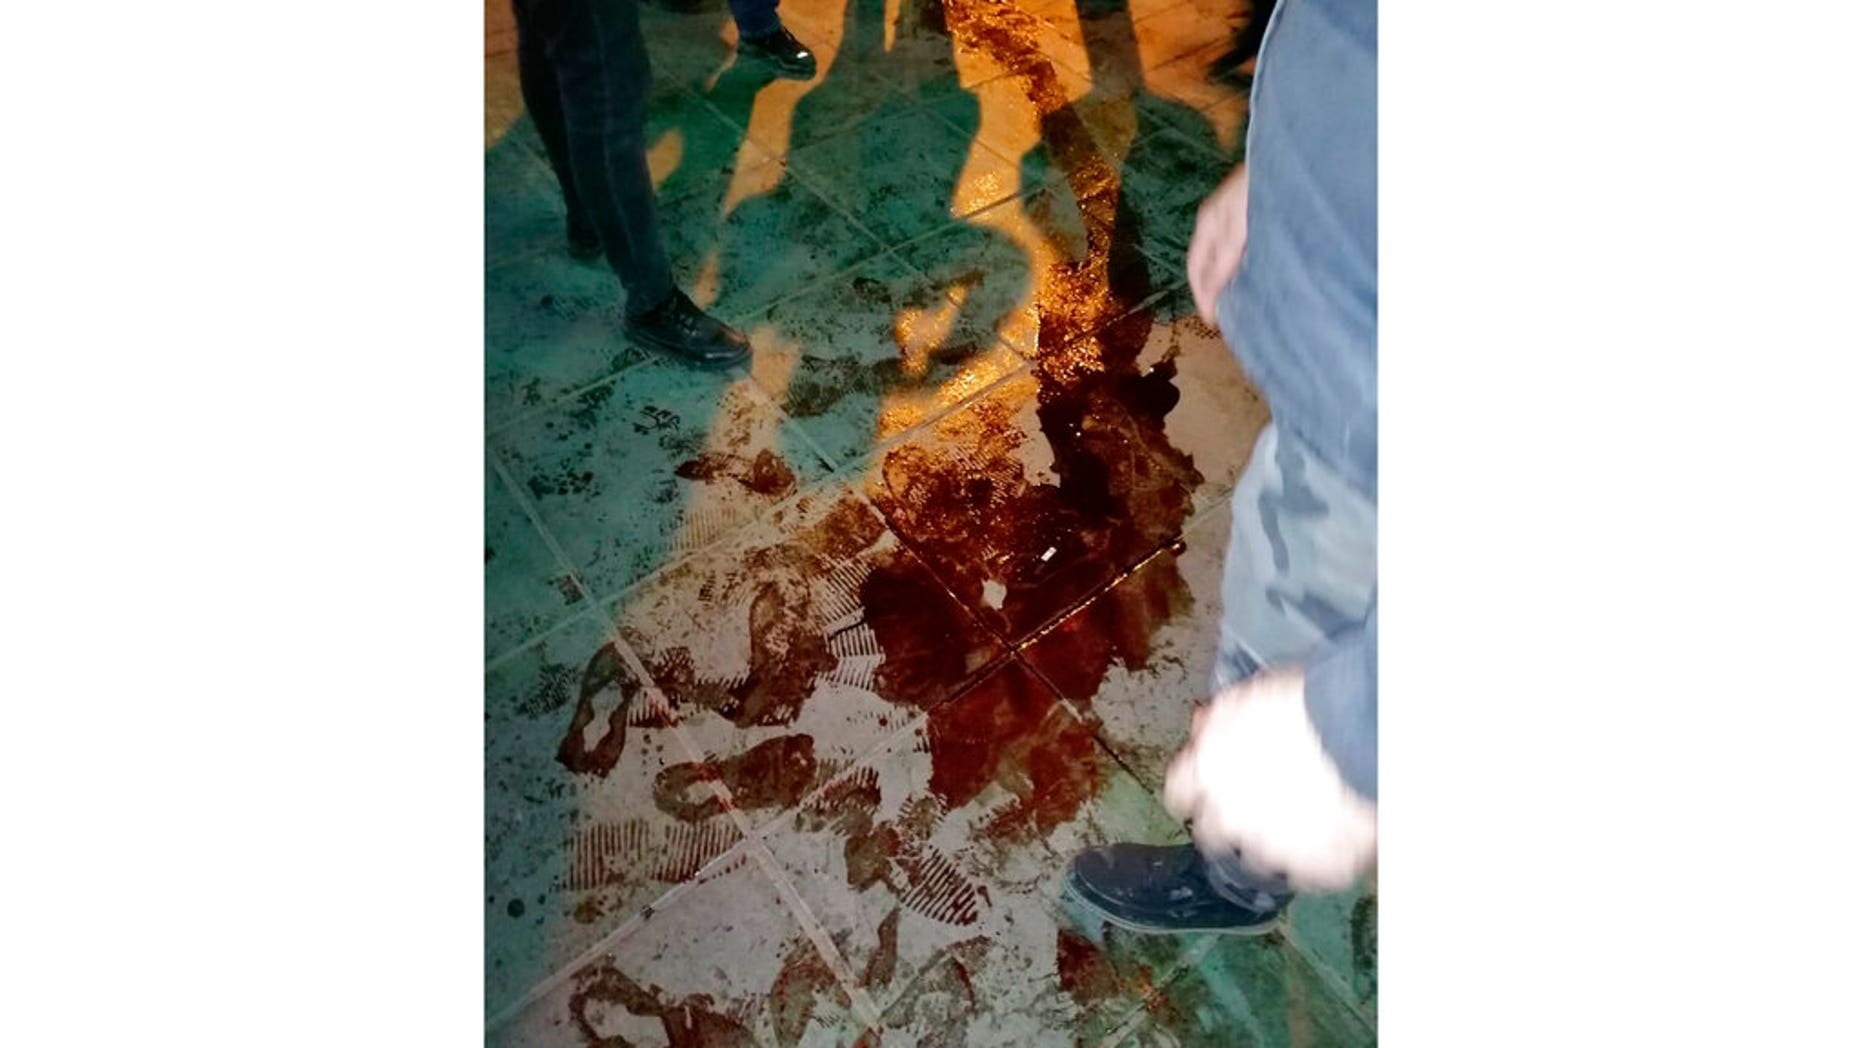 This Sunday, Jan. 12, 2020, photo provided by the New York-based Center for Human Rights in Iran, shows a pool of blood near Azadi, or Freedom, Square after police broke up a demonstration in Tehran, Iran. (Center for Human Rights in Iran via AP)